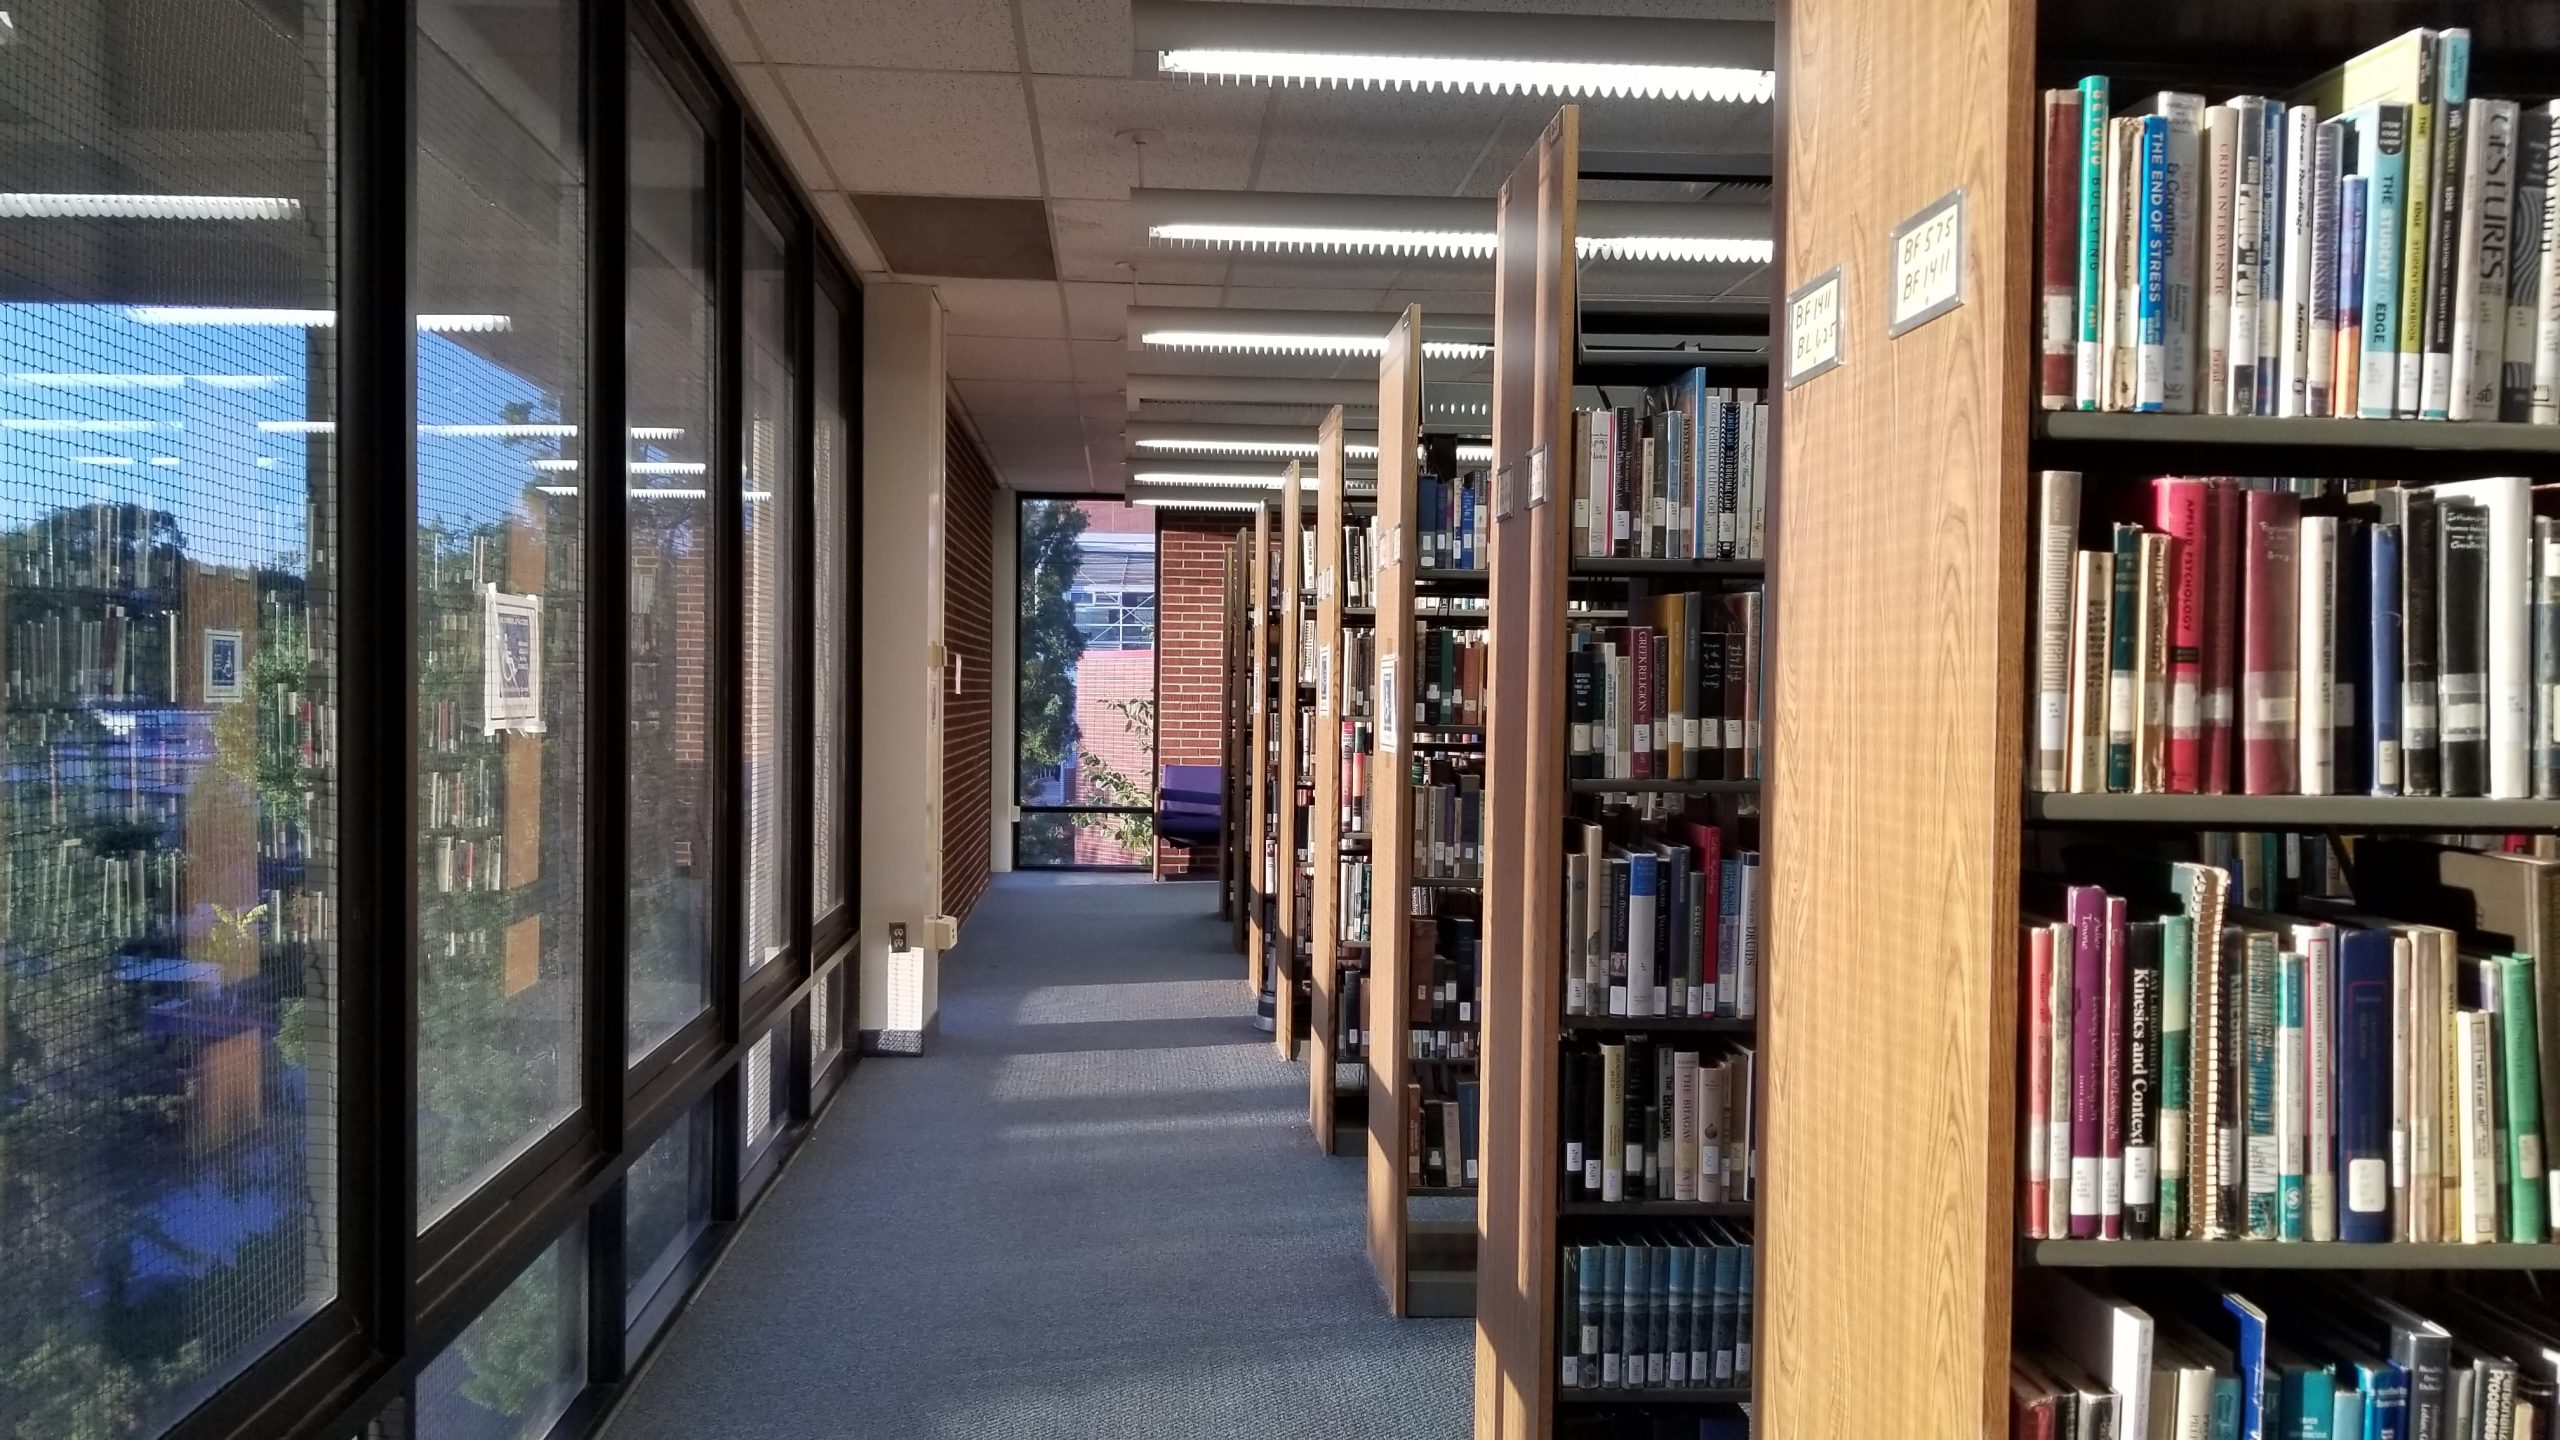 Bookshelves in a library by a wall of windows